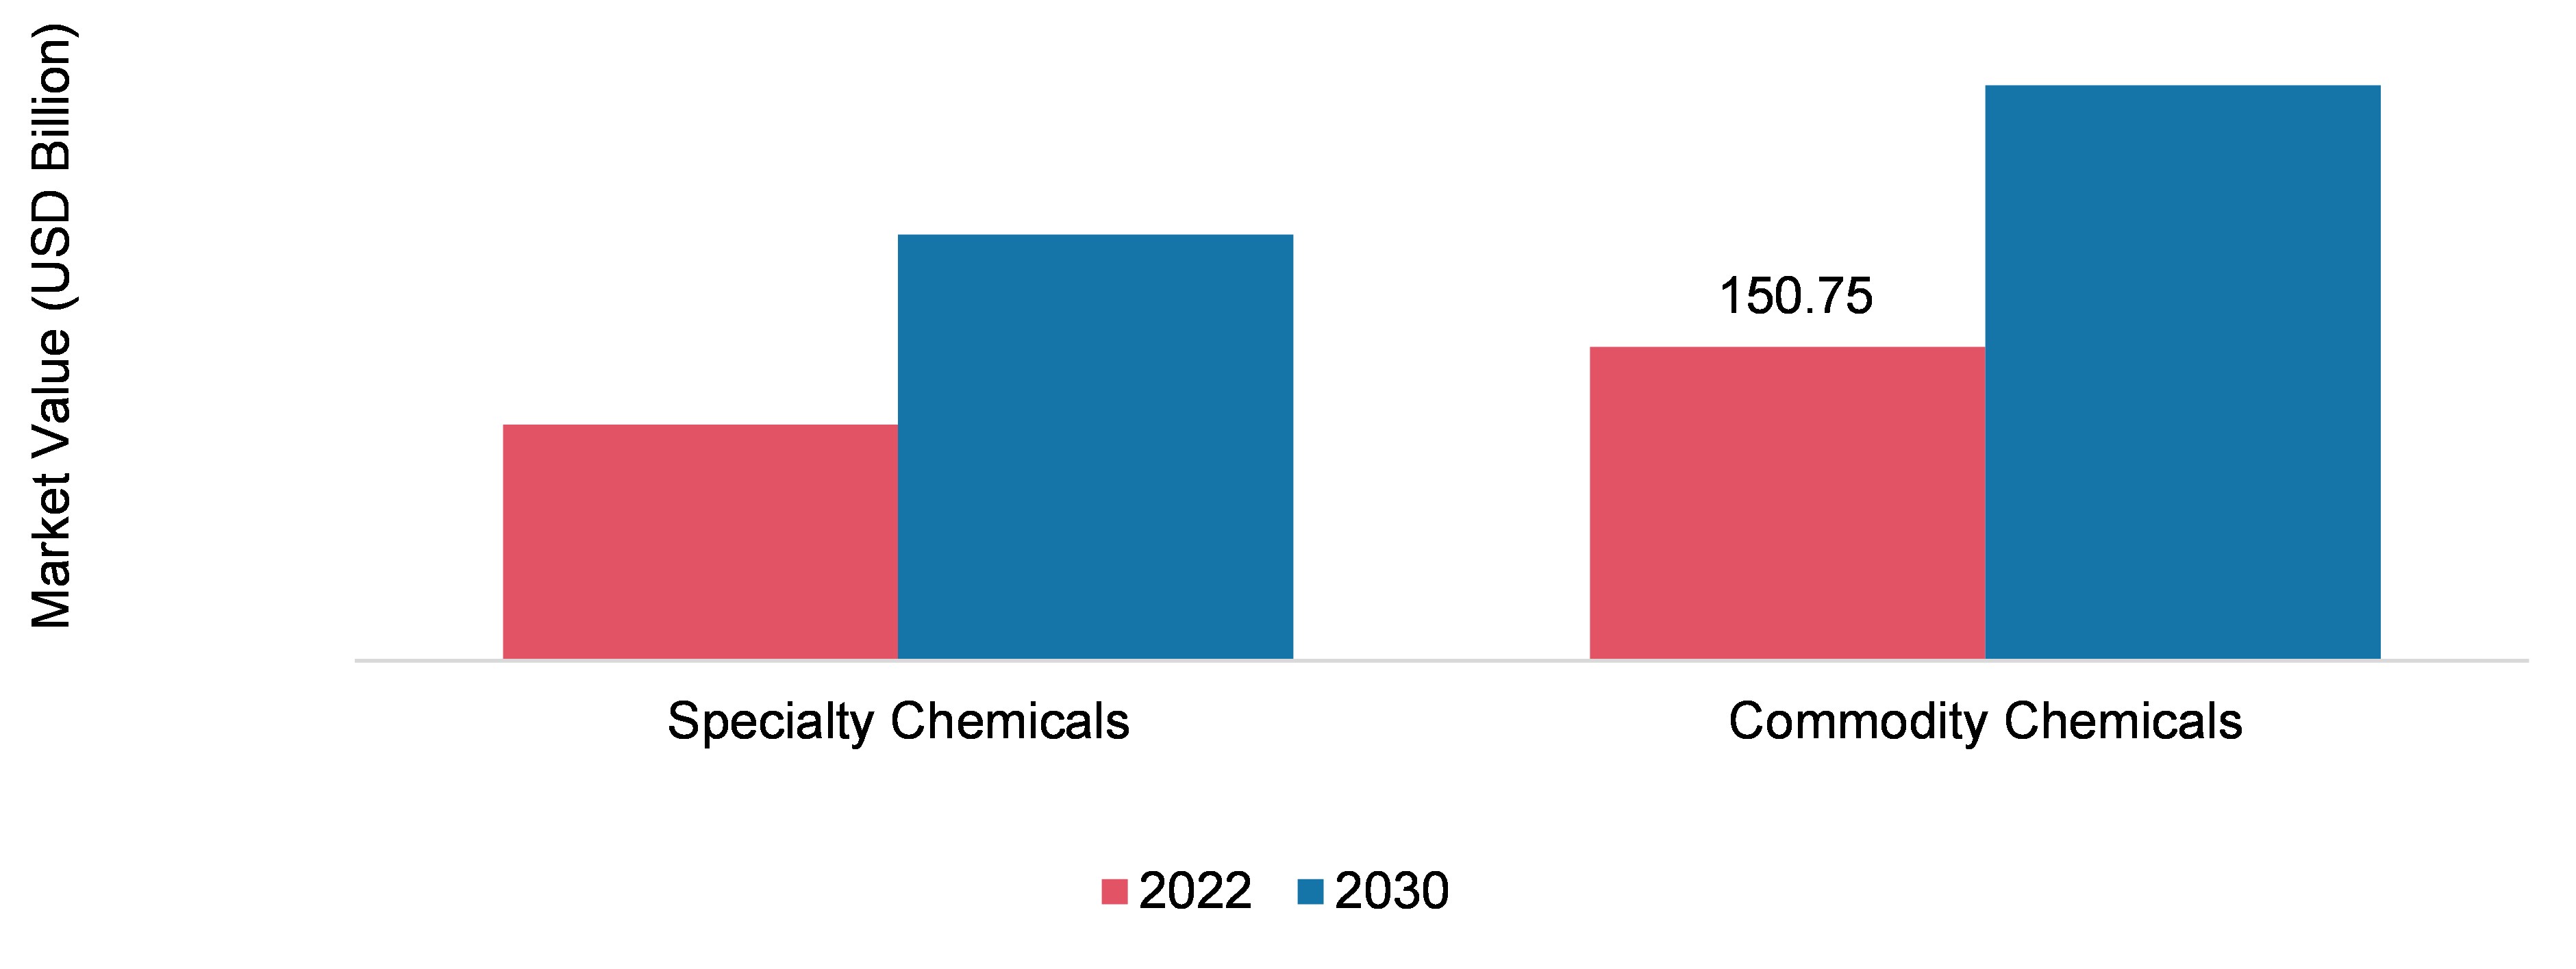 CHEMICAL DISTRIBUTION MARKET, BY PRODUCT, 2022 & 2030 (USD BILLION)